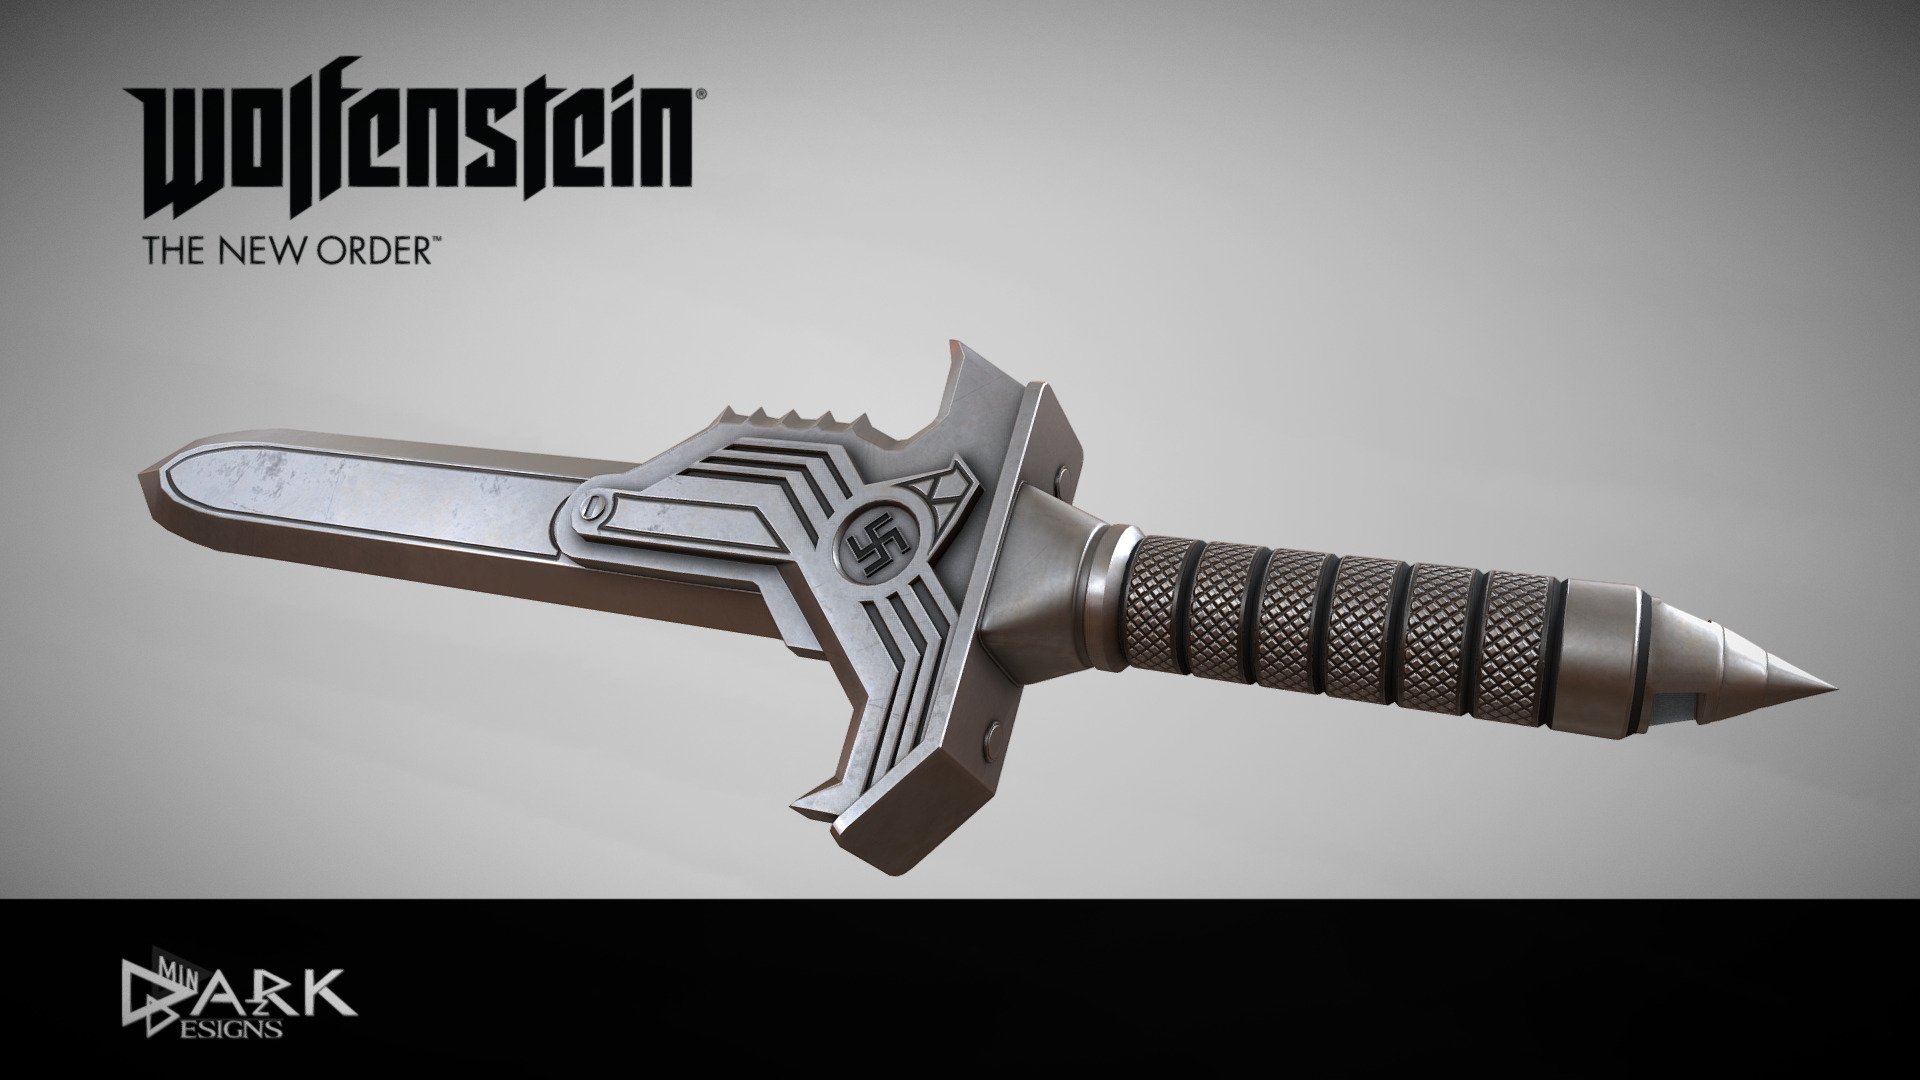 The Blade used by B.J. Blazkowicz in Wolfenstein: The New Order, inspired by the SS ceremonial Dagger and the U.S. M3 Fighiting Knife.

Modeled in Maya, UV in 3D-Coat, Textures in Substance Painter - Wolfenstein 1960 Combat Knife - Buy Royalty Free 3D model by dark-minaz 3d model